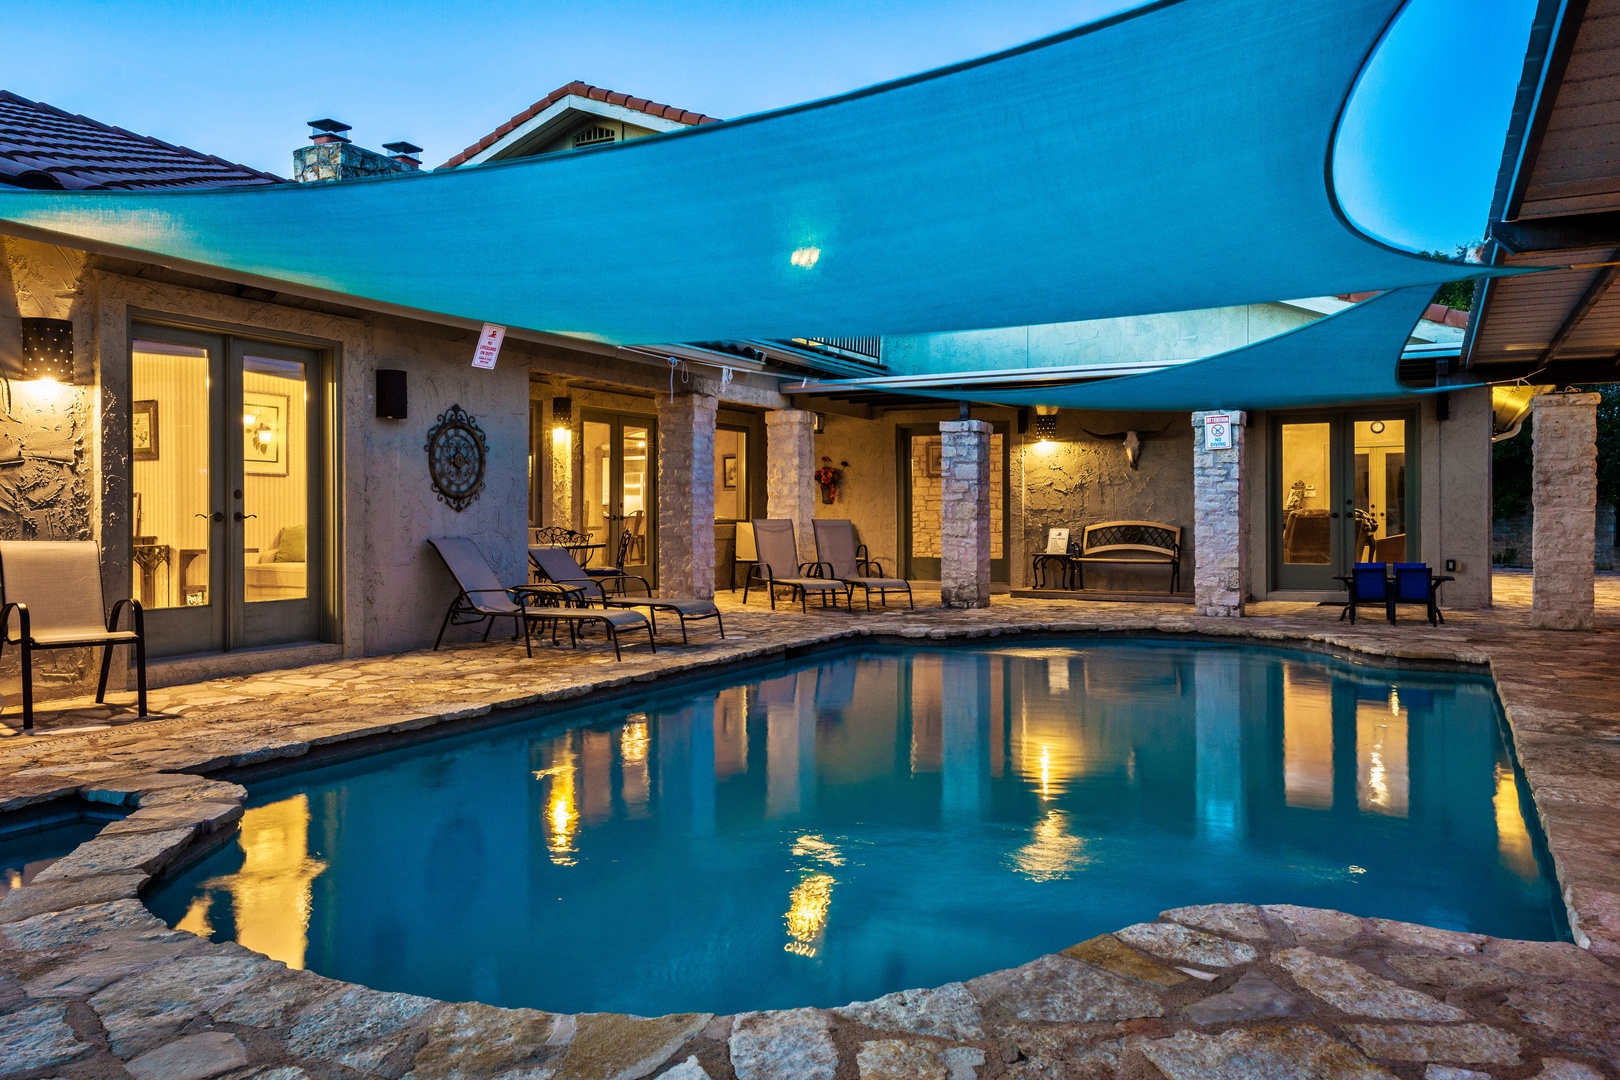 Private instagrammable pool for your friends and family to enjoy!